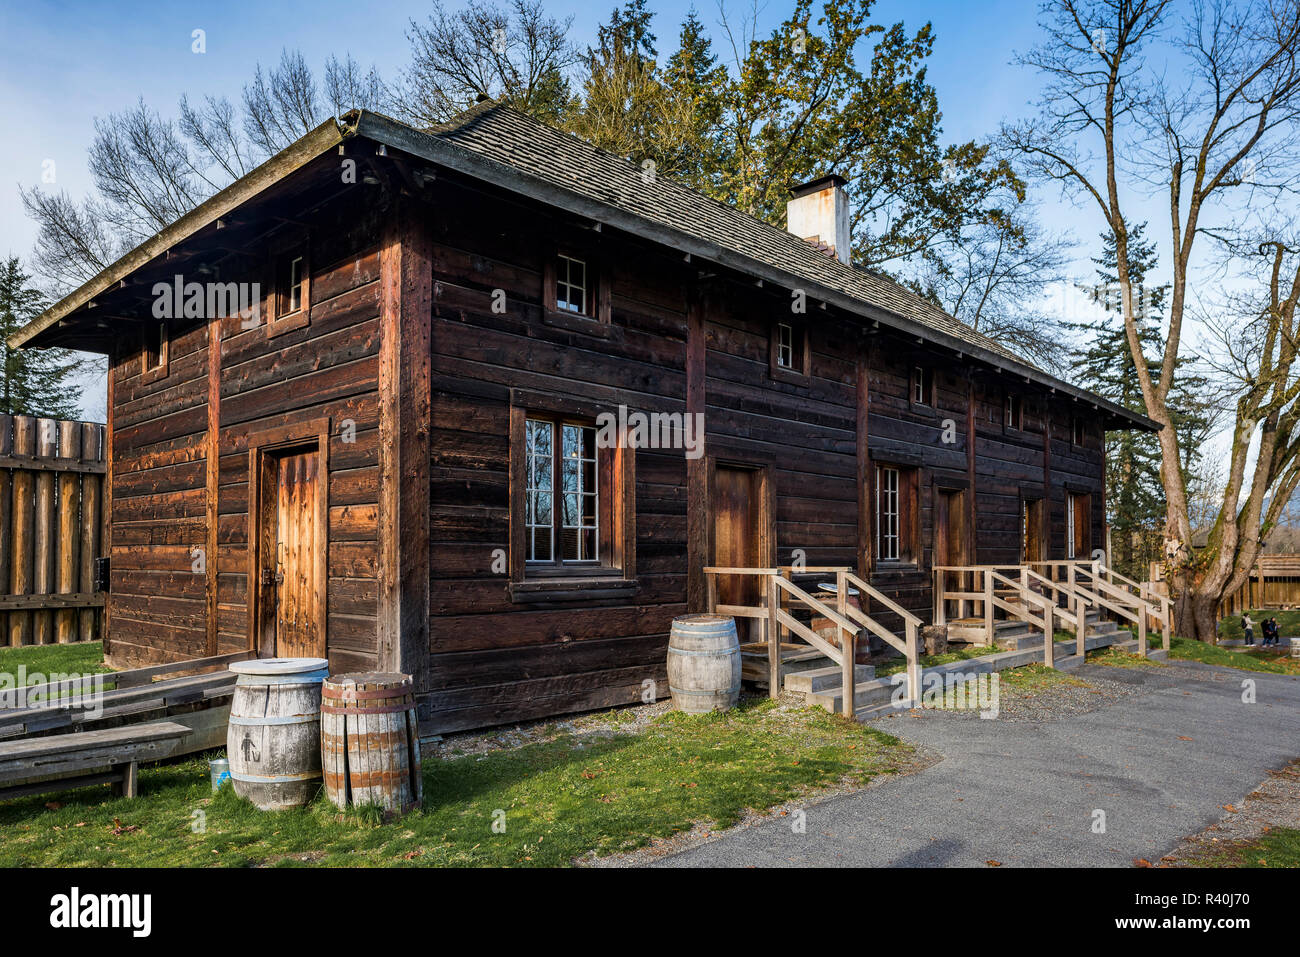 Fort Langley National Historic Site, Fort Langley, British Columbia, Canada Stock Photo